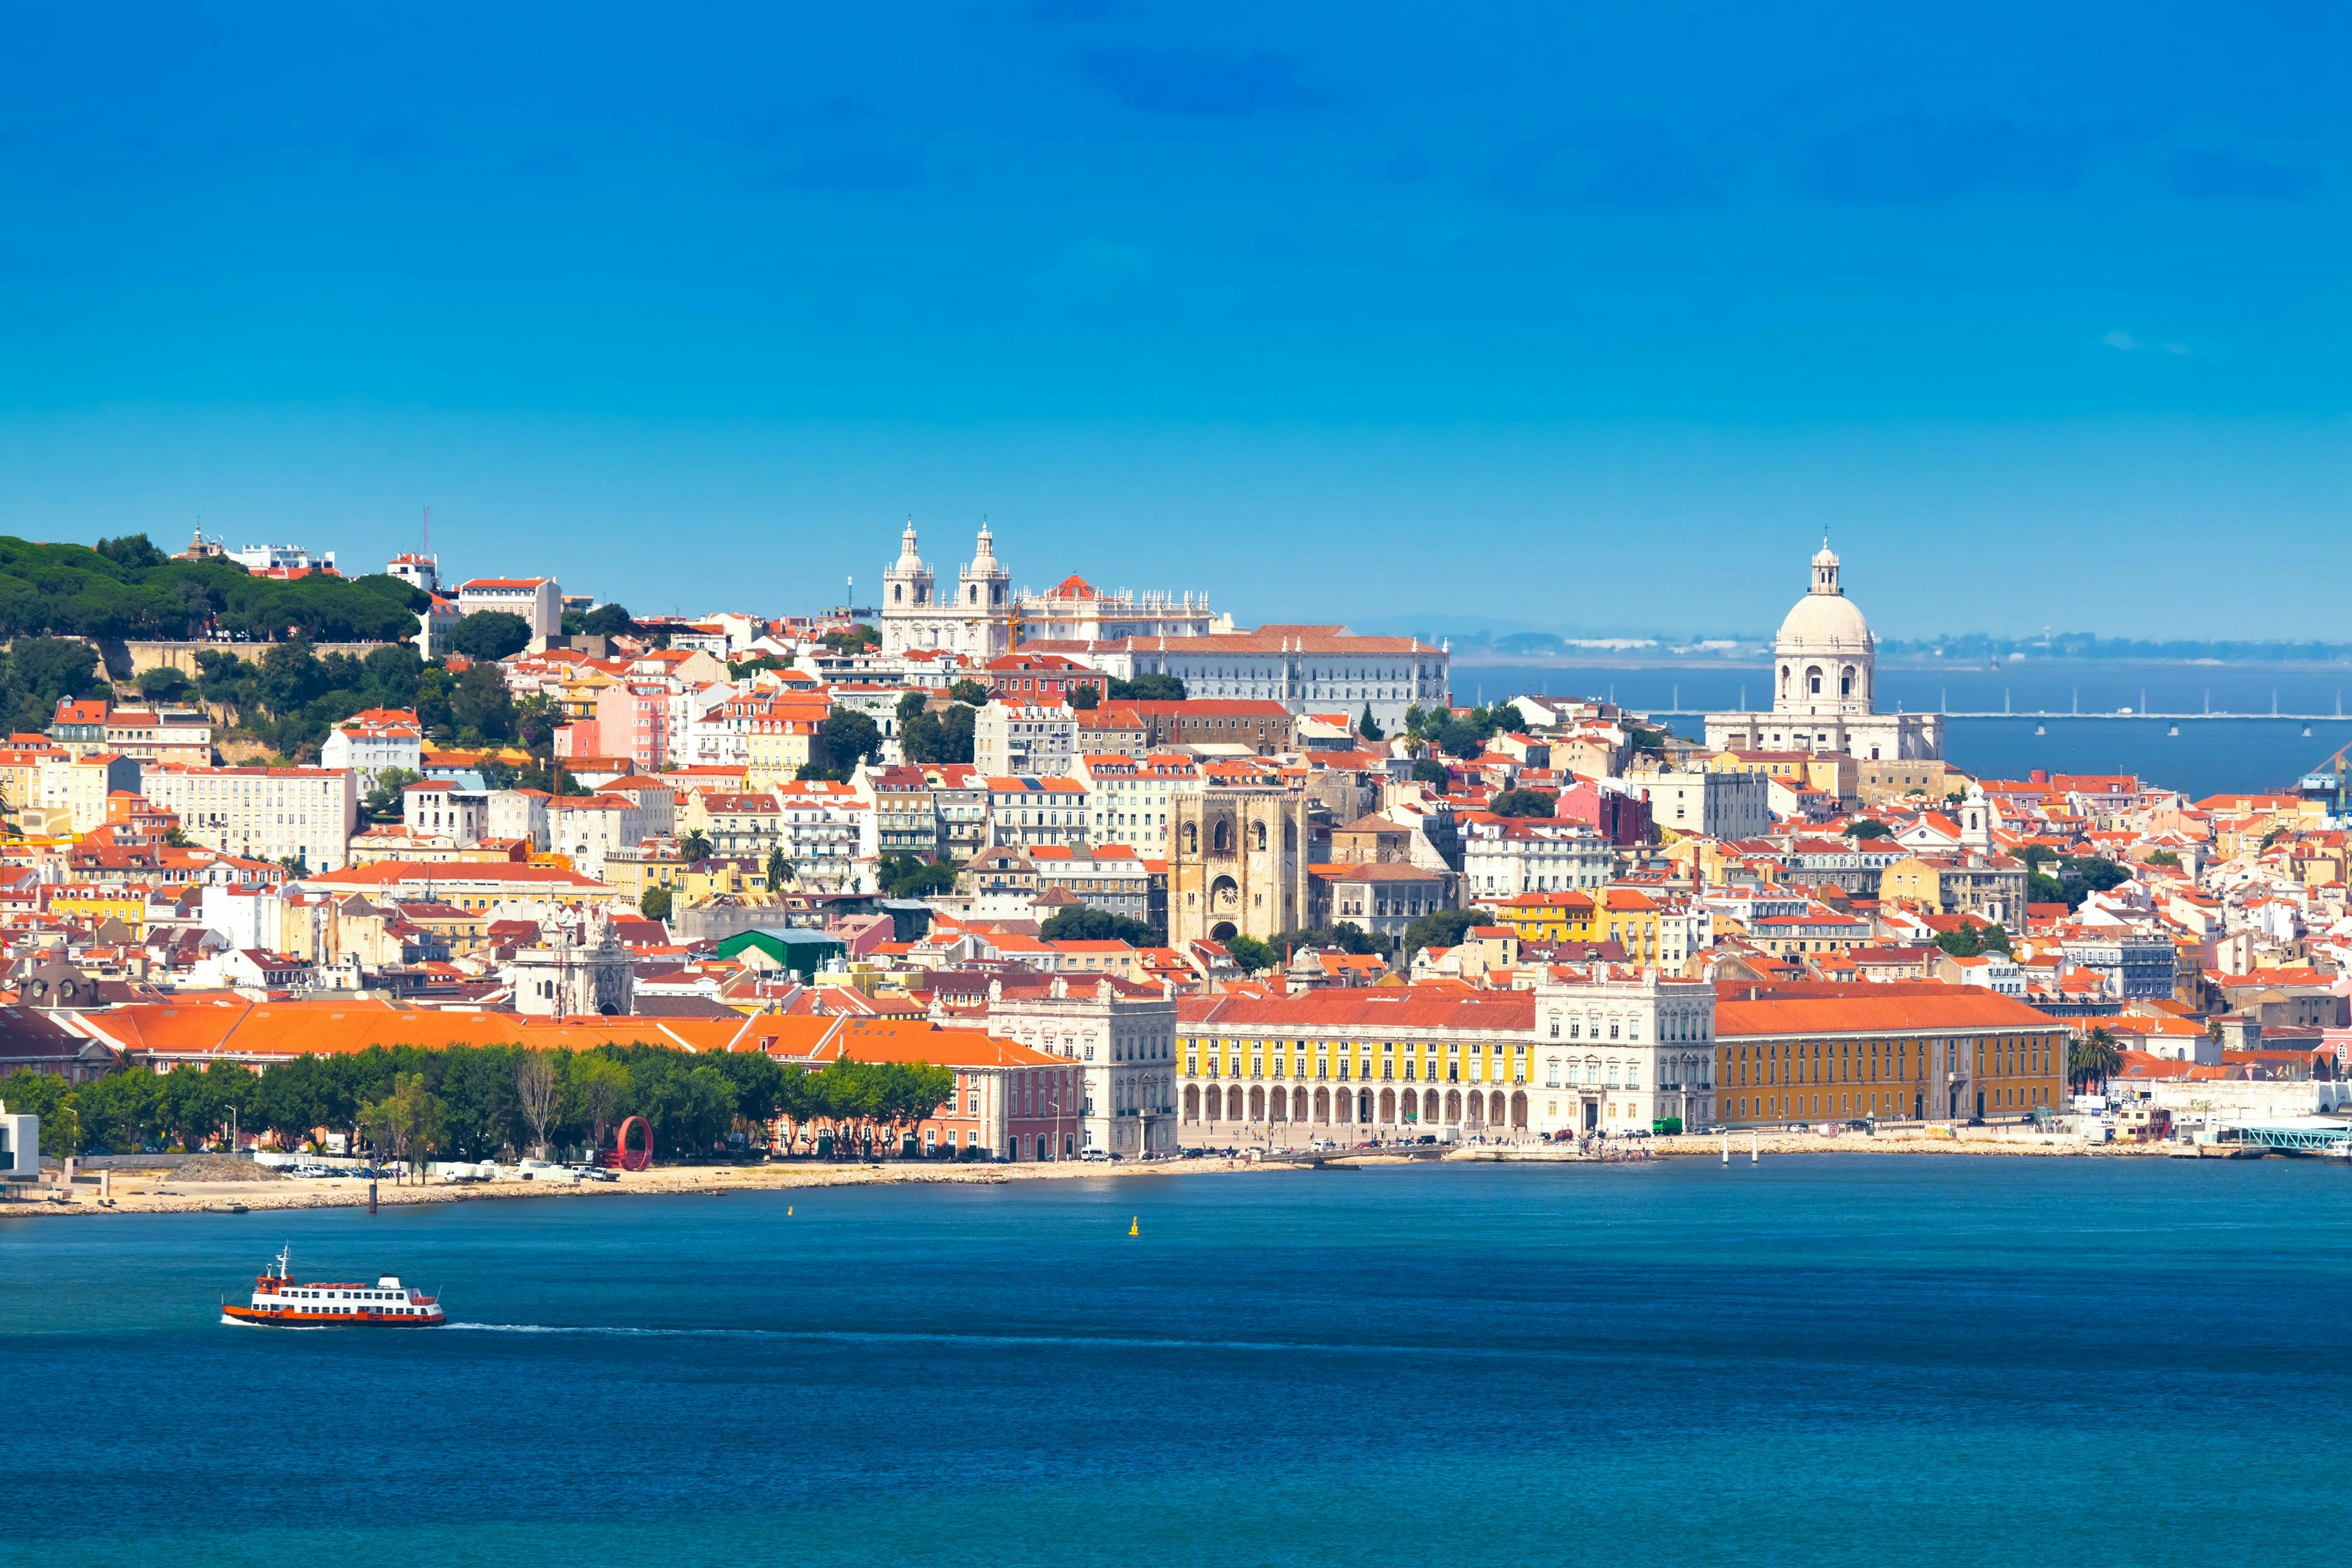 A scenic view of Lisbon featuring the Tejo River with the Vasco da Gama Bridge in the background, connecting Lisbon to the South Bank.